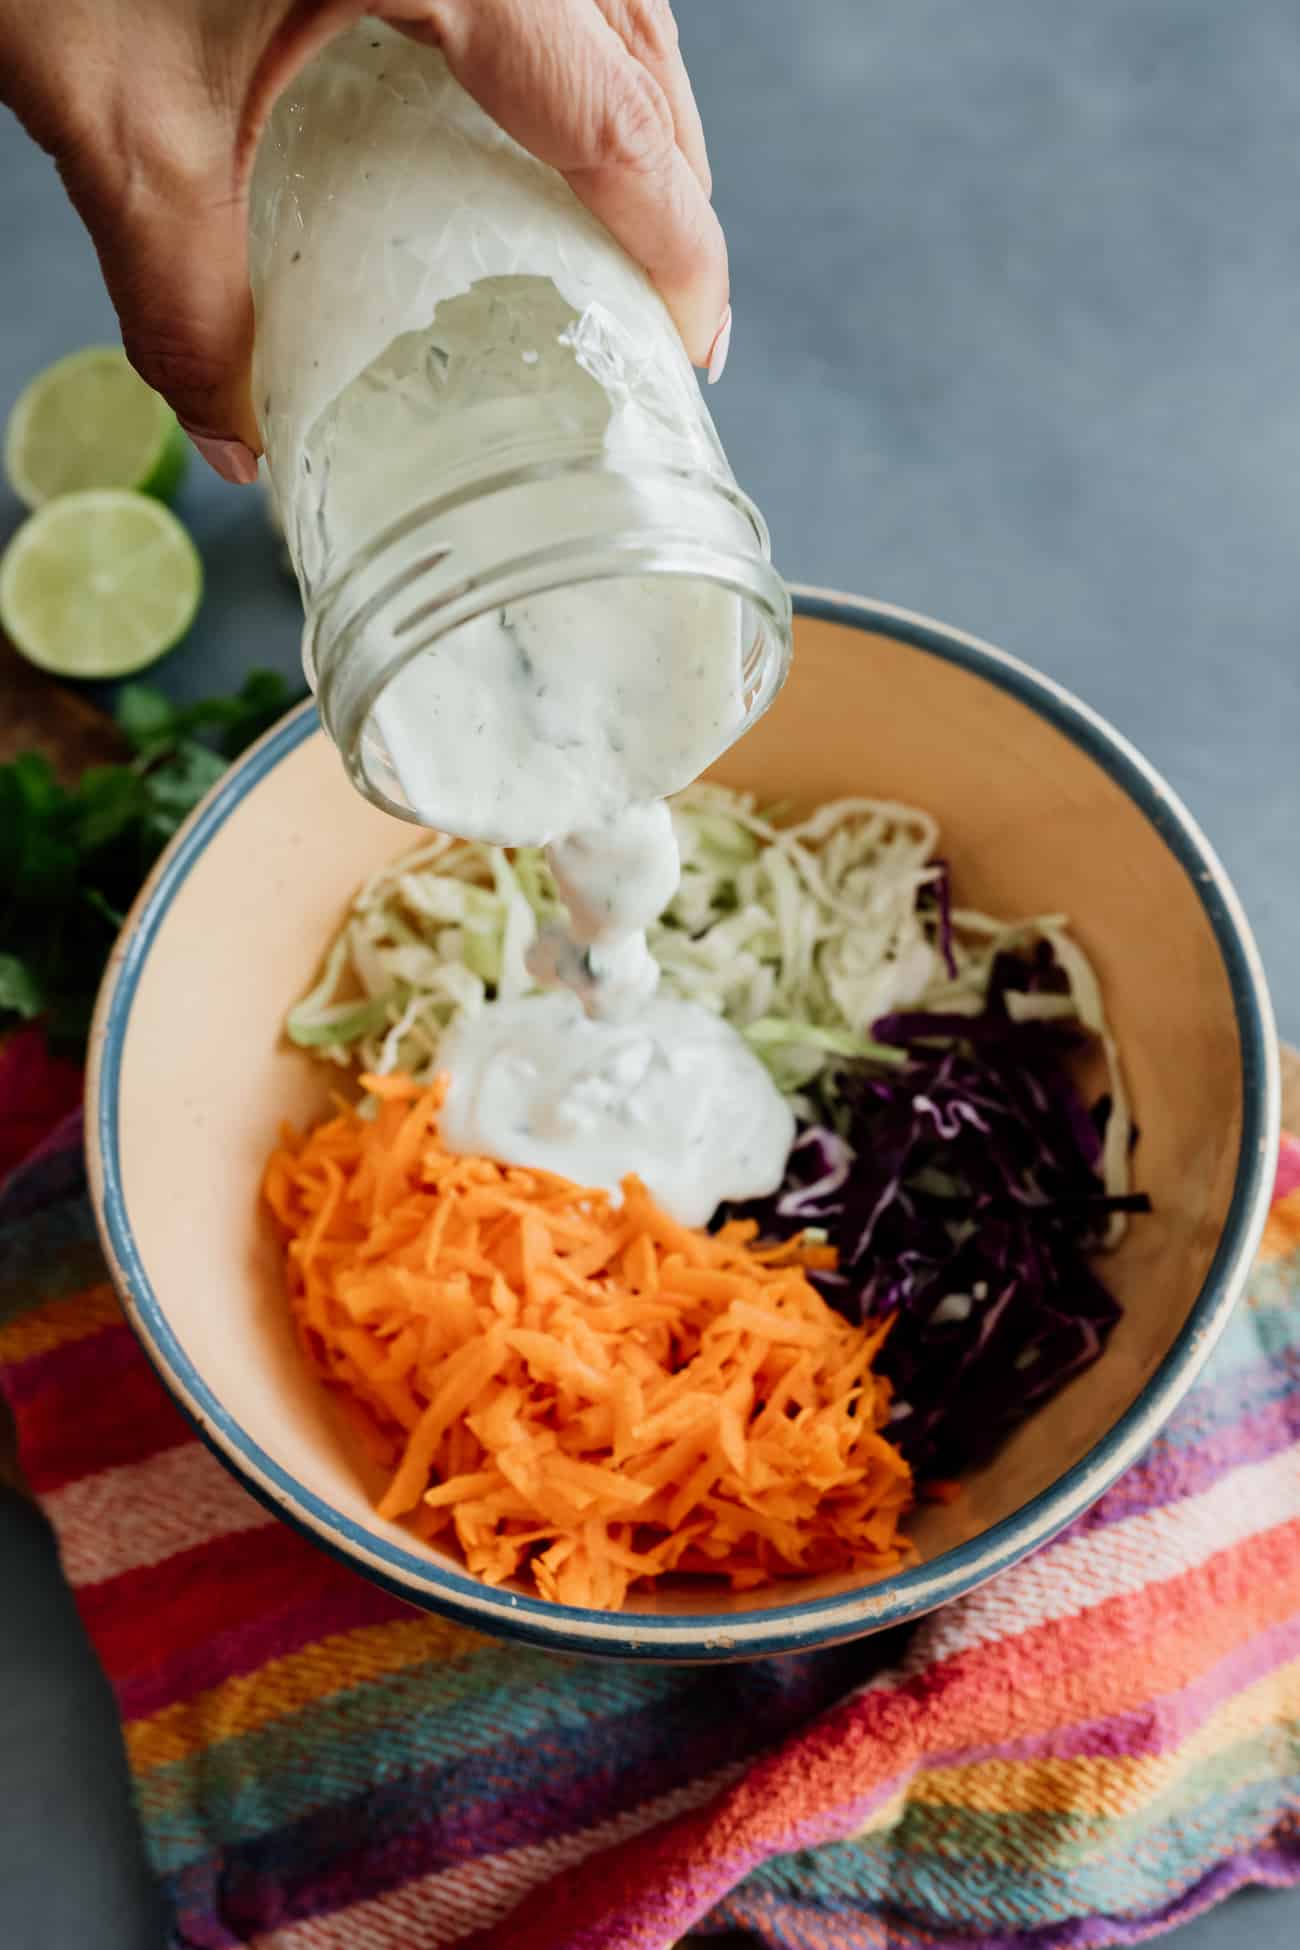 spicy coleslaw dressing being poured over grated veggies.